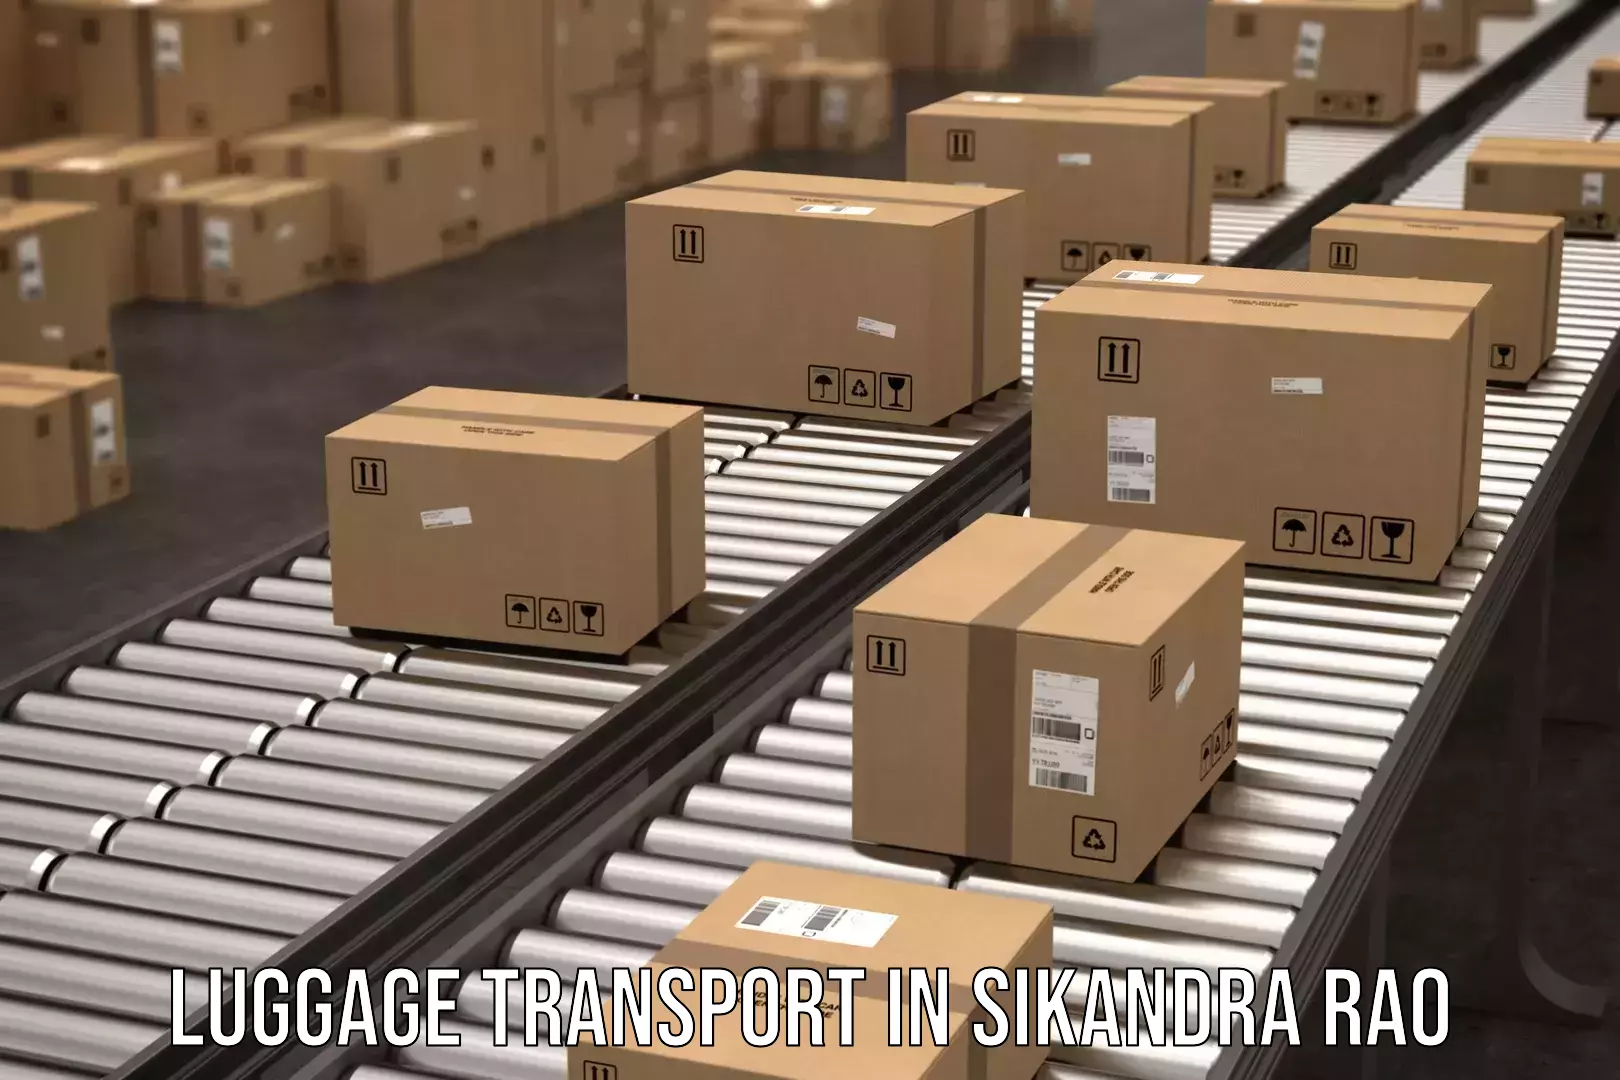 Baggage transport management in Sikandra Rao